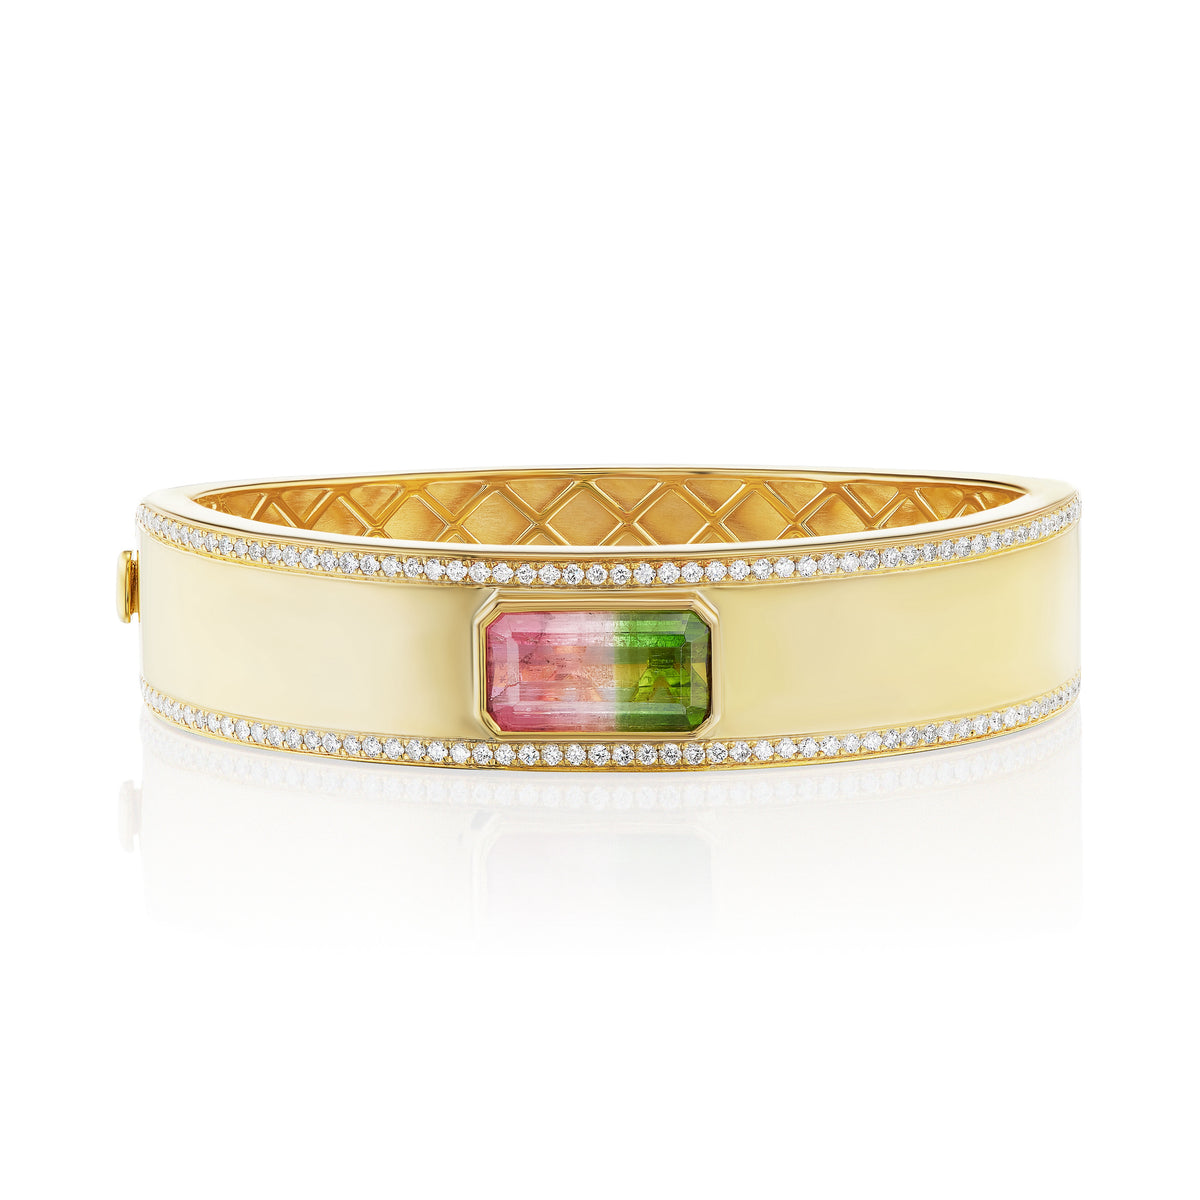 East-West Emerald Cut Watermelon Tourmaline Gold Cuff with Diamond Pavé in Yellow Gold